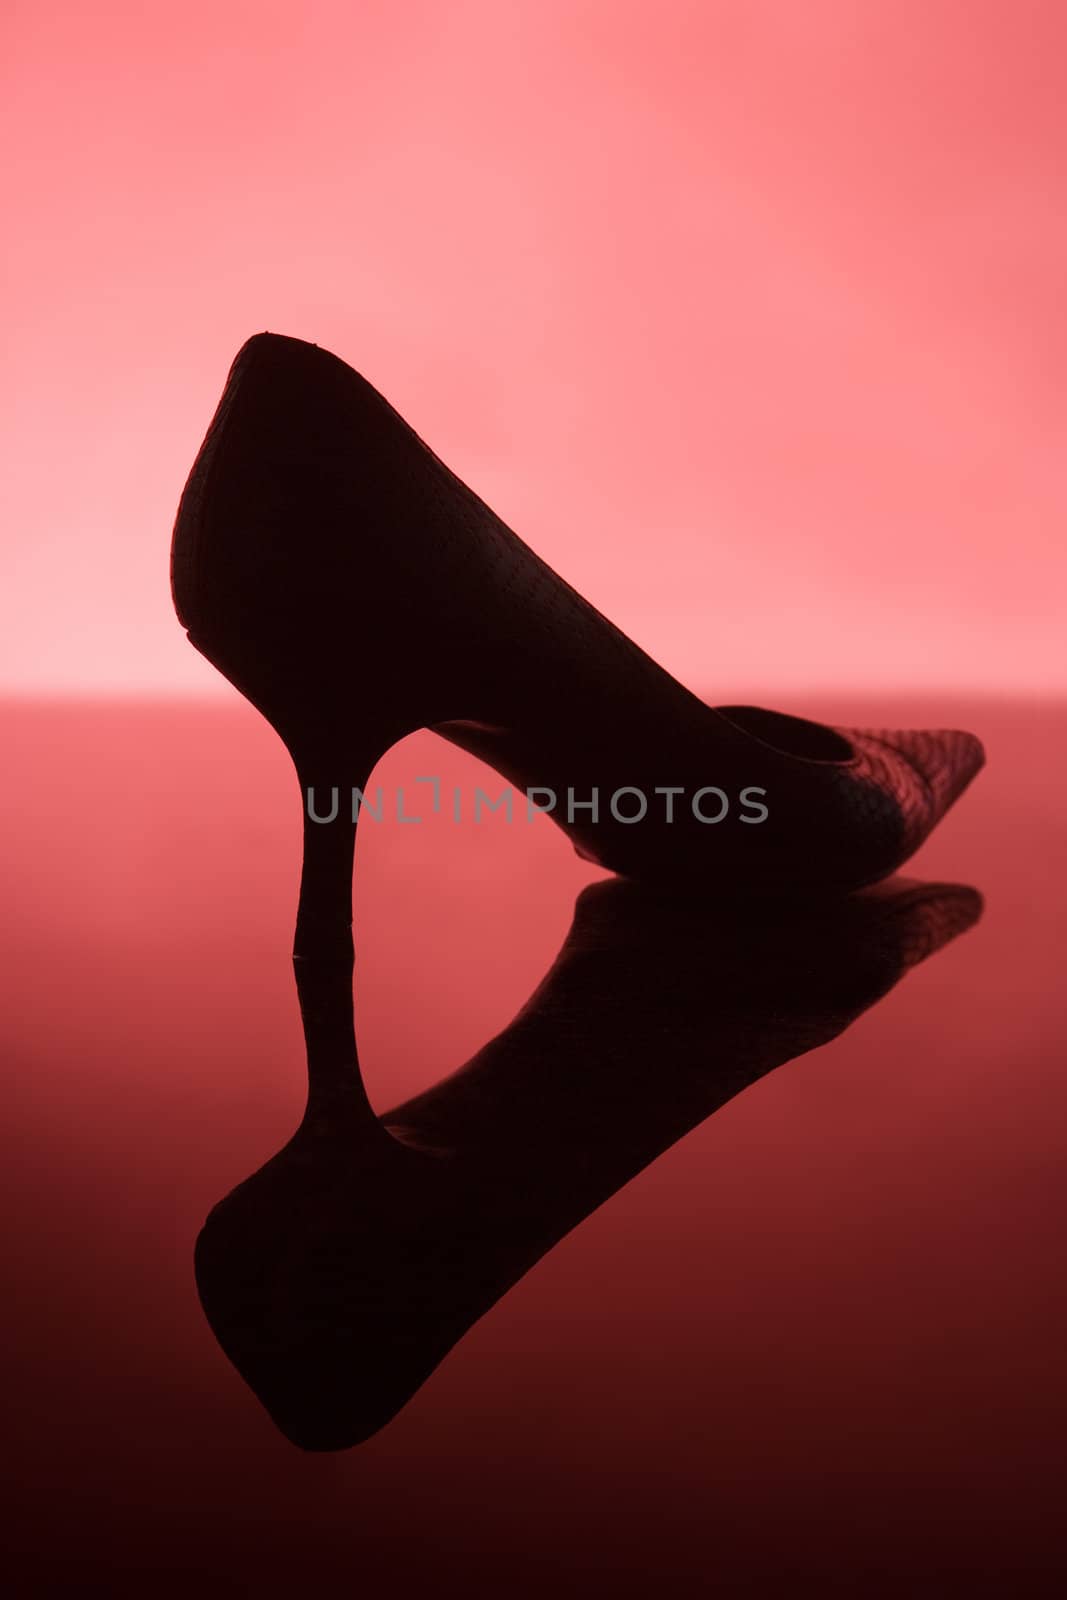 Female shoe on red background